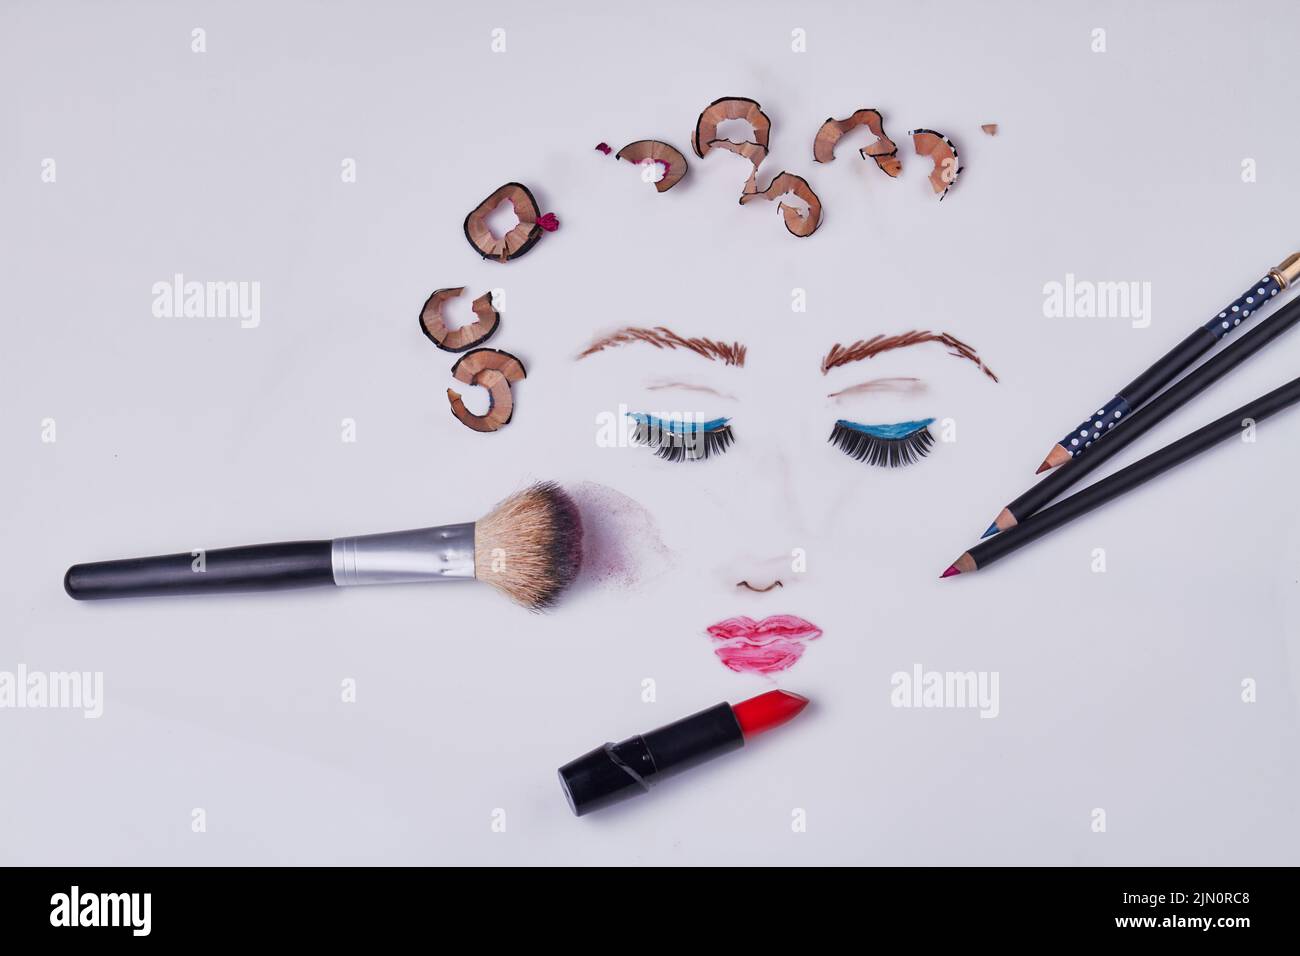 Top view makeup accessories with pencil shavings on white background. Drawn female face with her eyes closed. Stock Photo